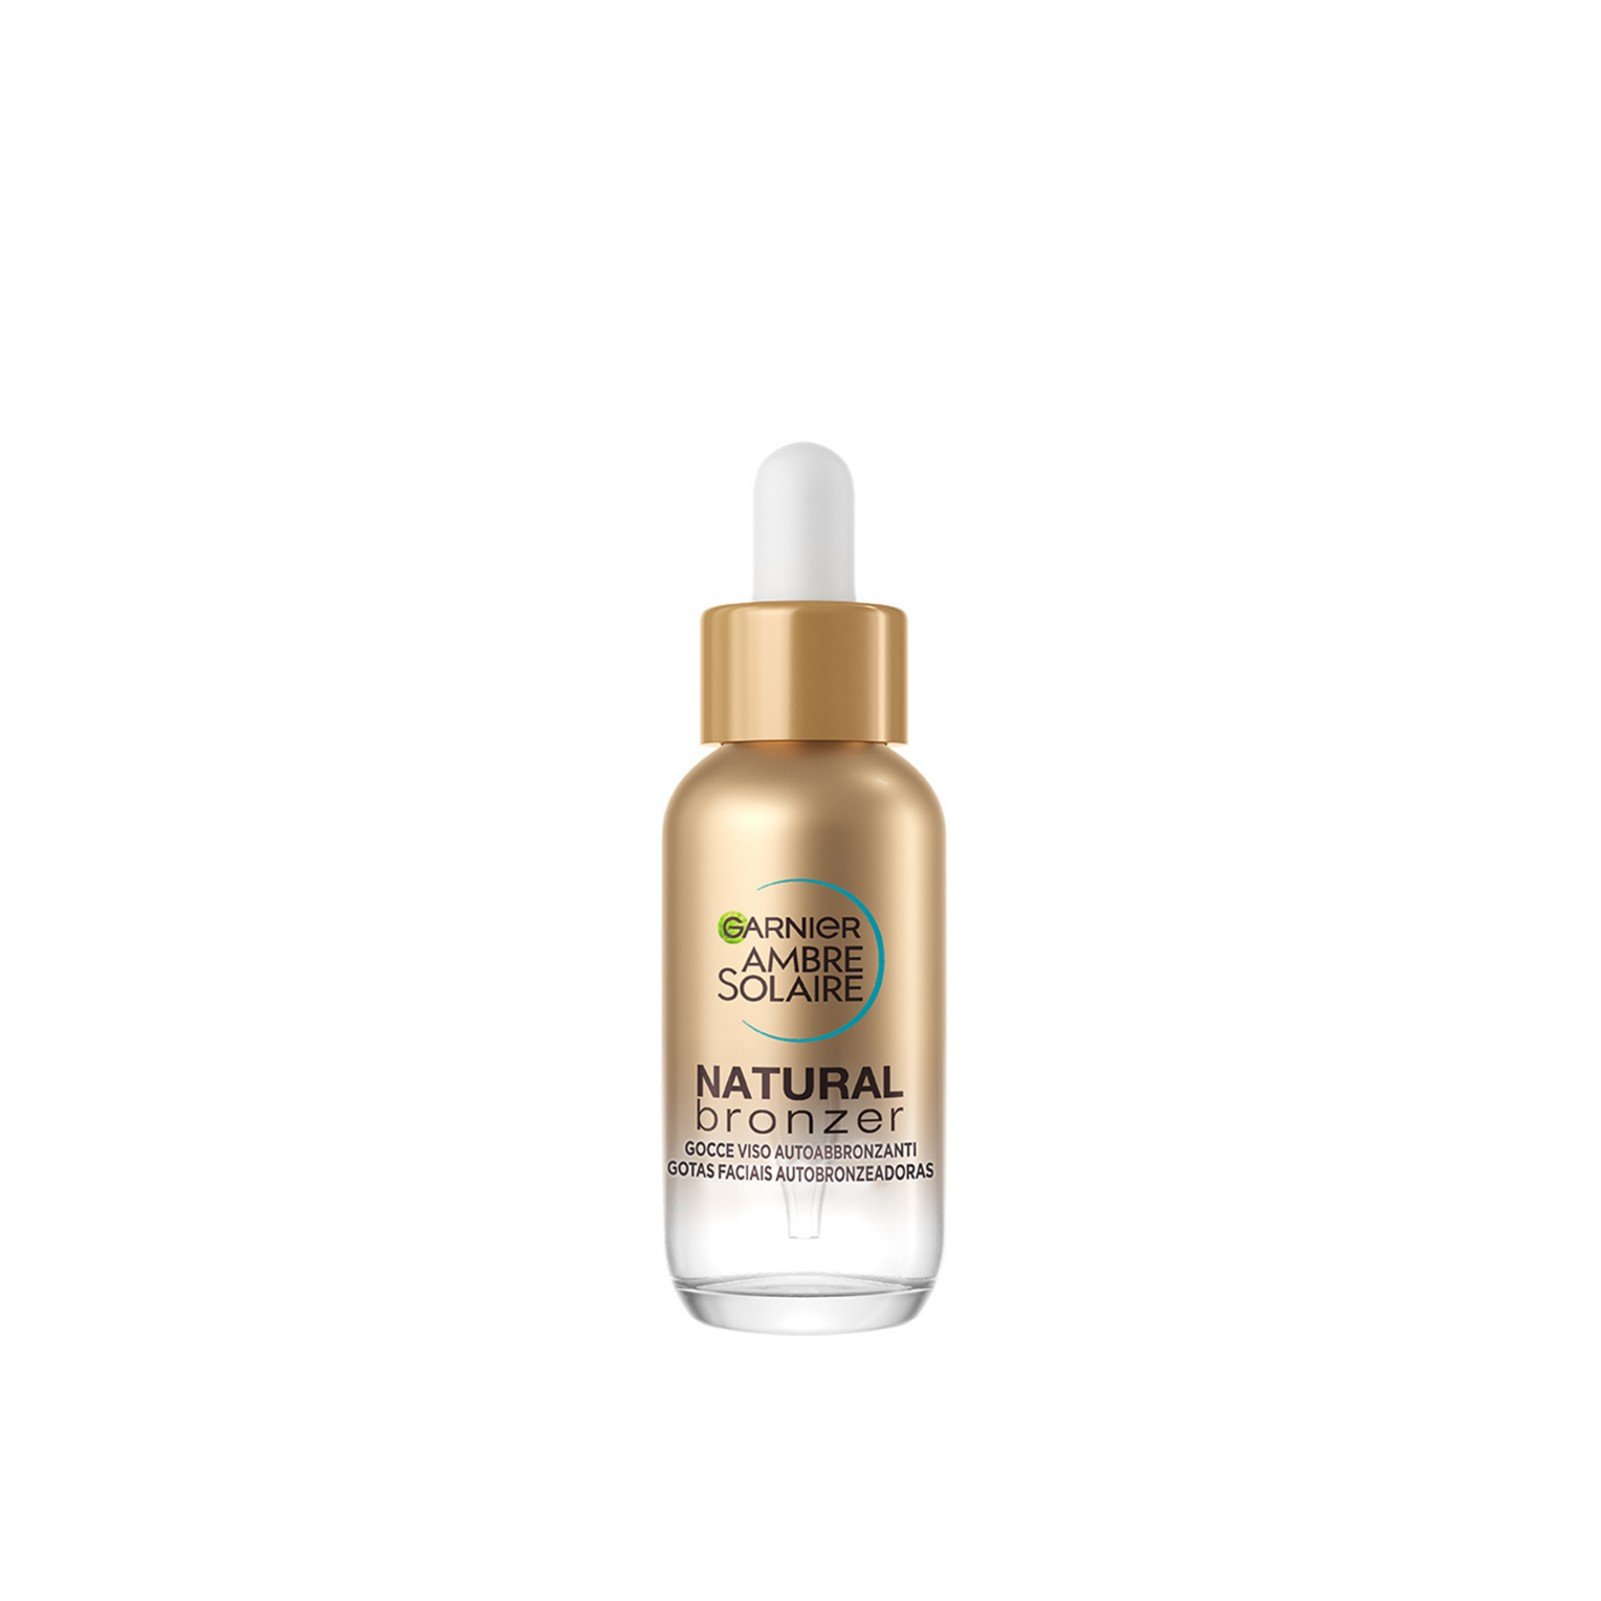 Glorious Bytte Sparsommelig Buy Garnier Ambre Solaire Natural Bronzer Self-Tan Face Drops 30ml (1.01 fl  oz) · USA